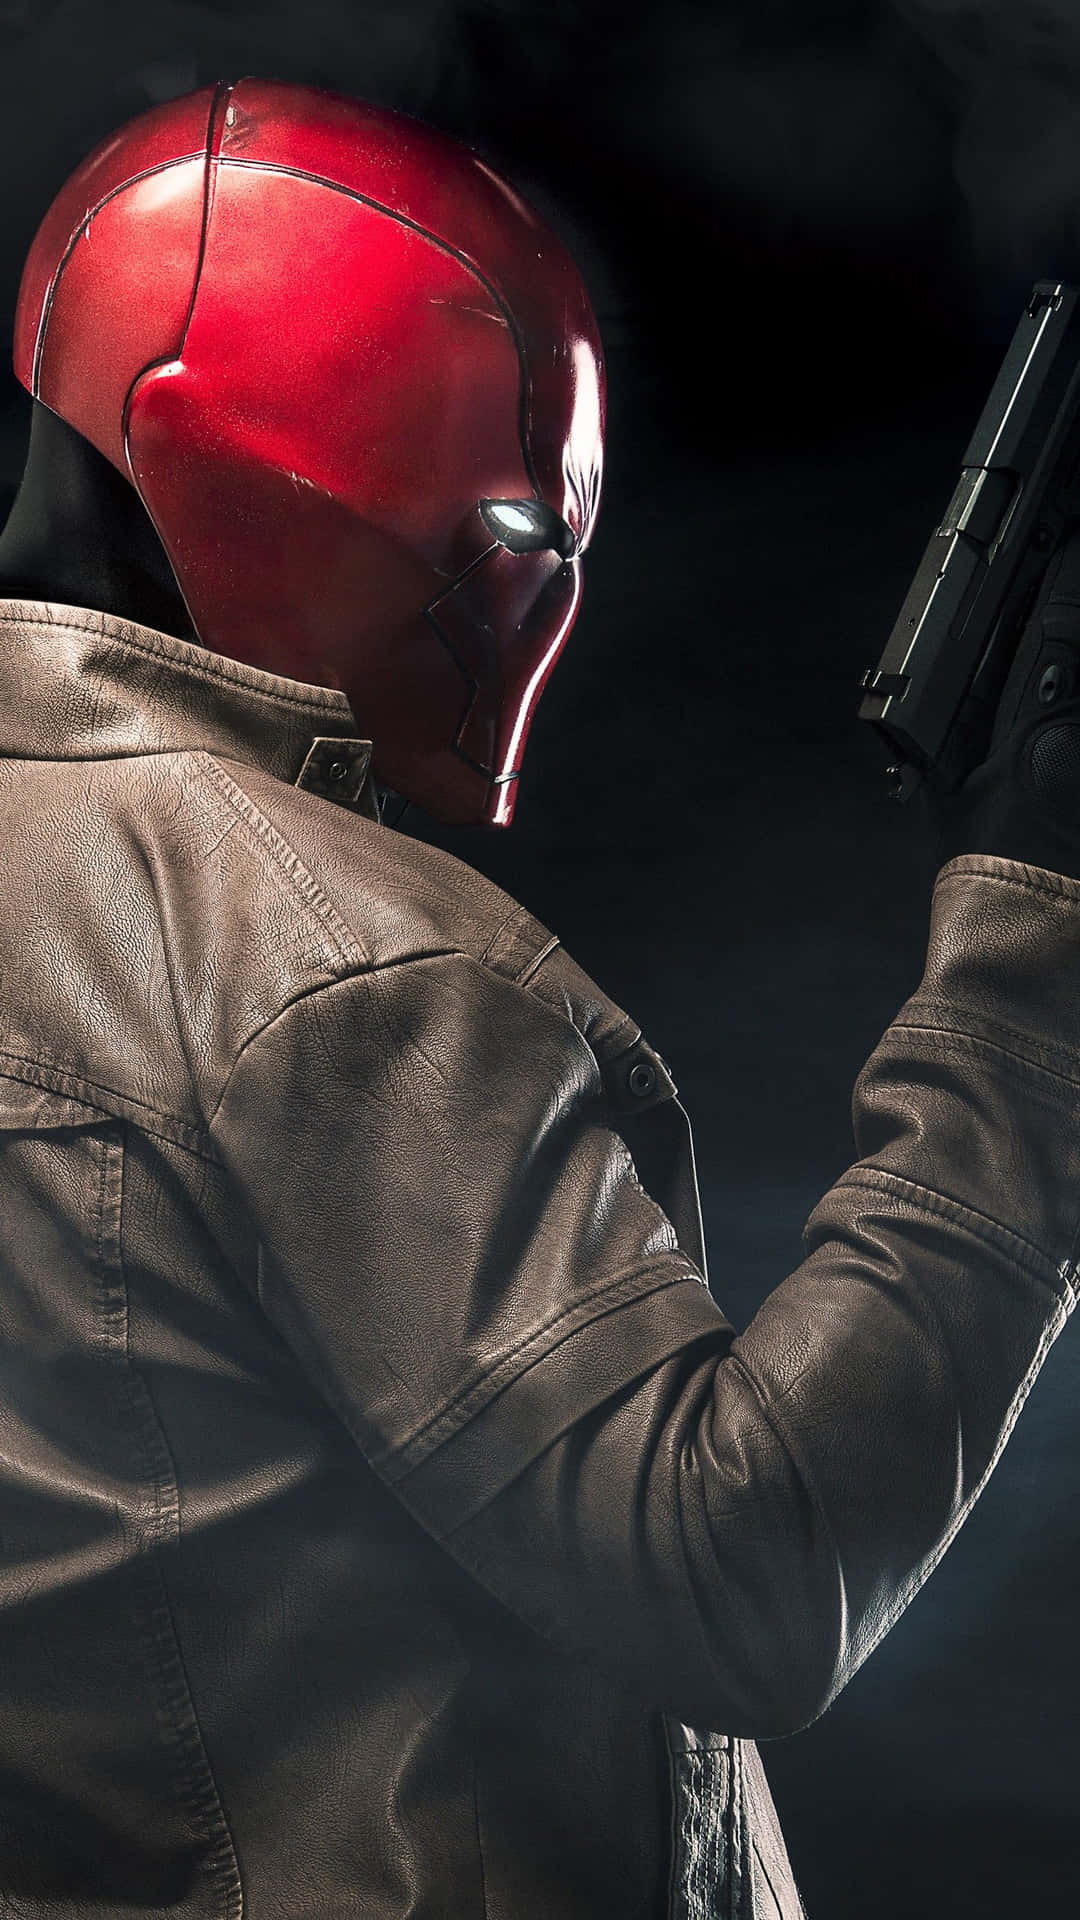 Download wallpaper 750x1334 red hood gotham knights video game iphone 7  iphone 8 750x1334 hd background 25945